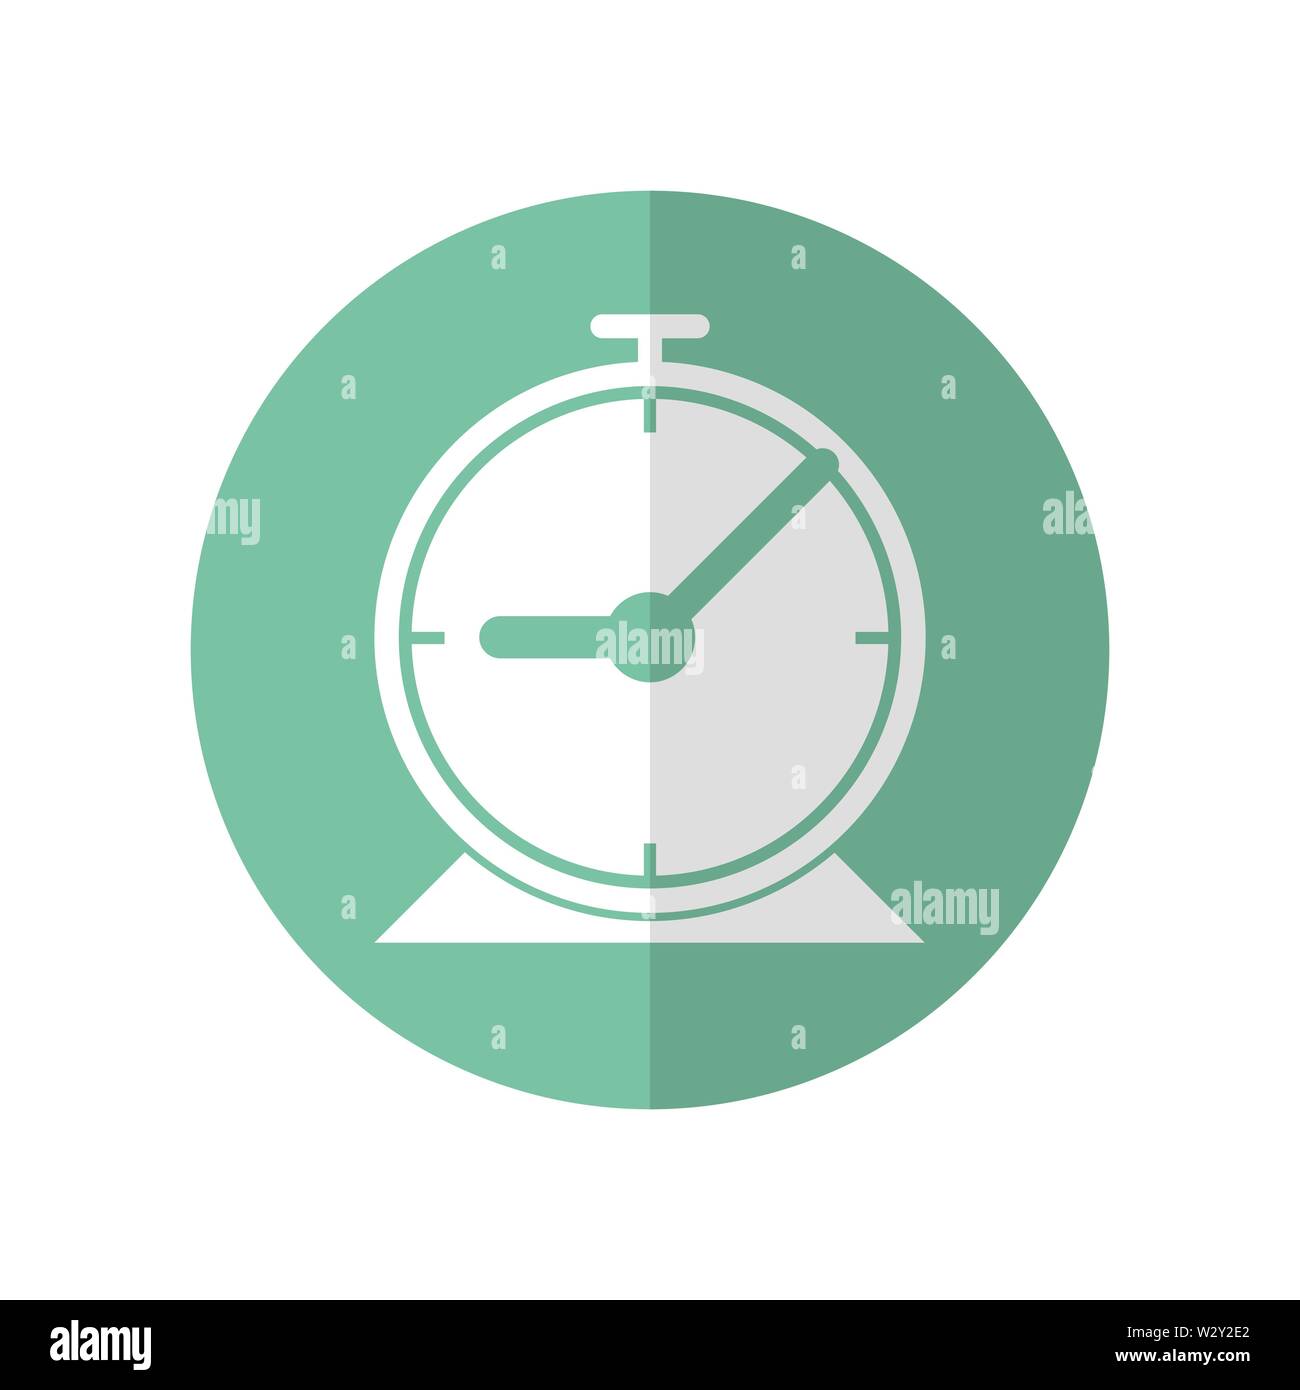 Presentation and Meeting Timers - TimeMachines Inc.